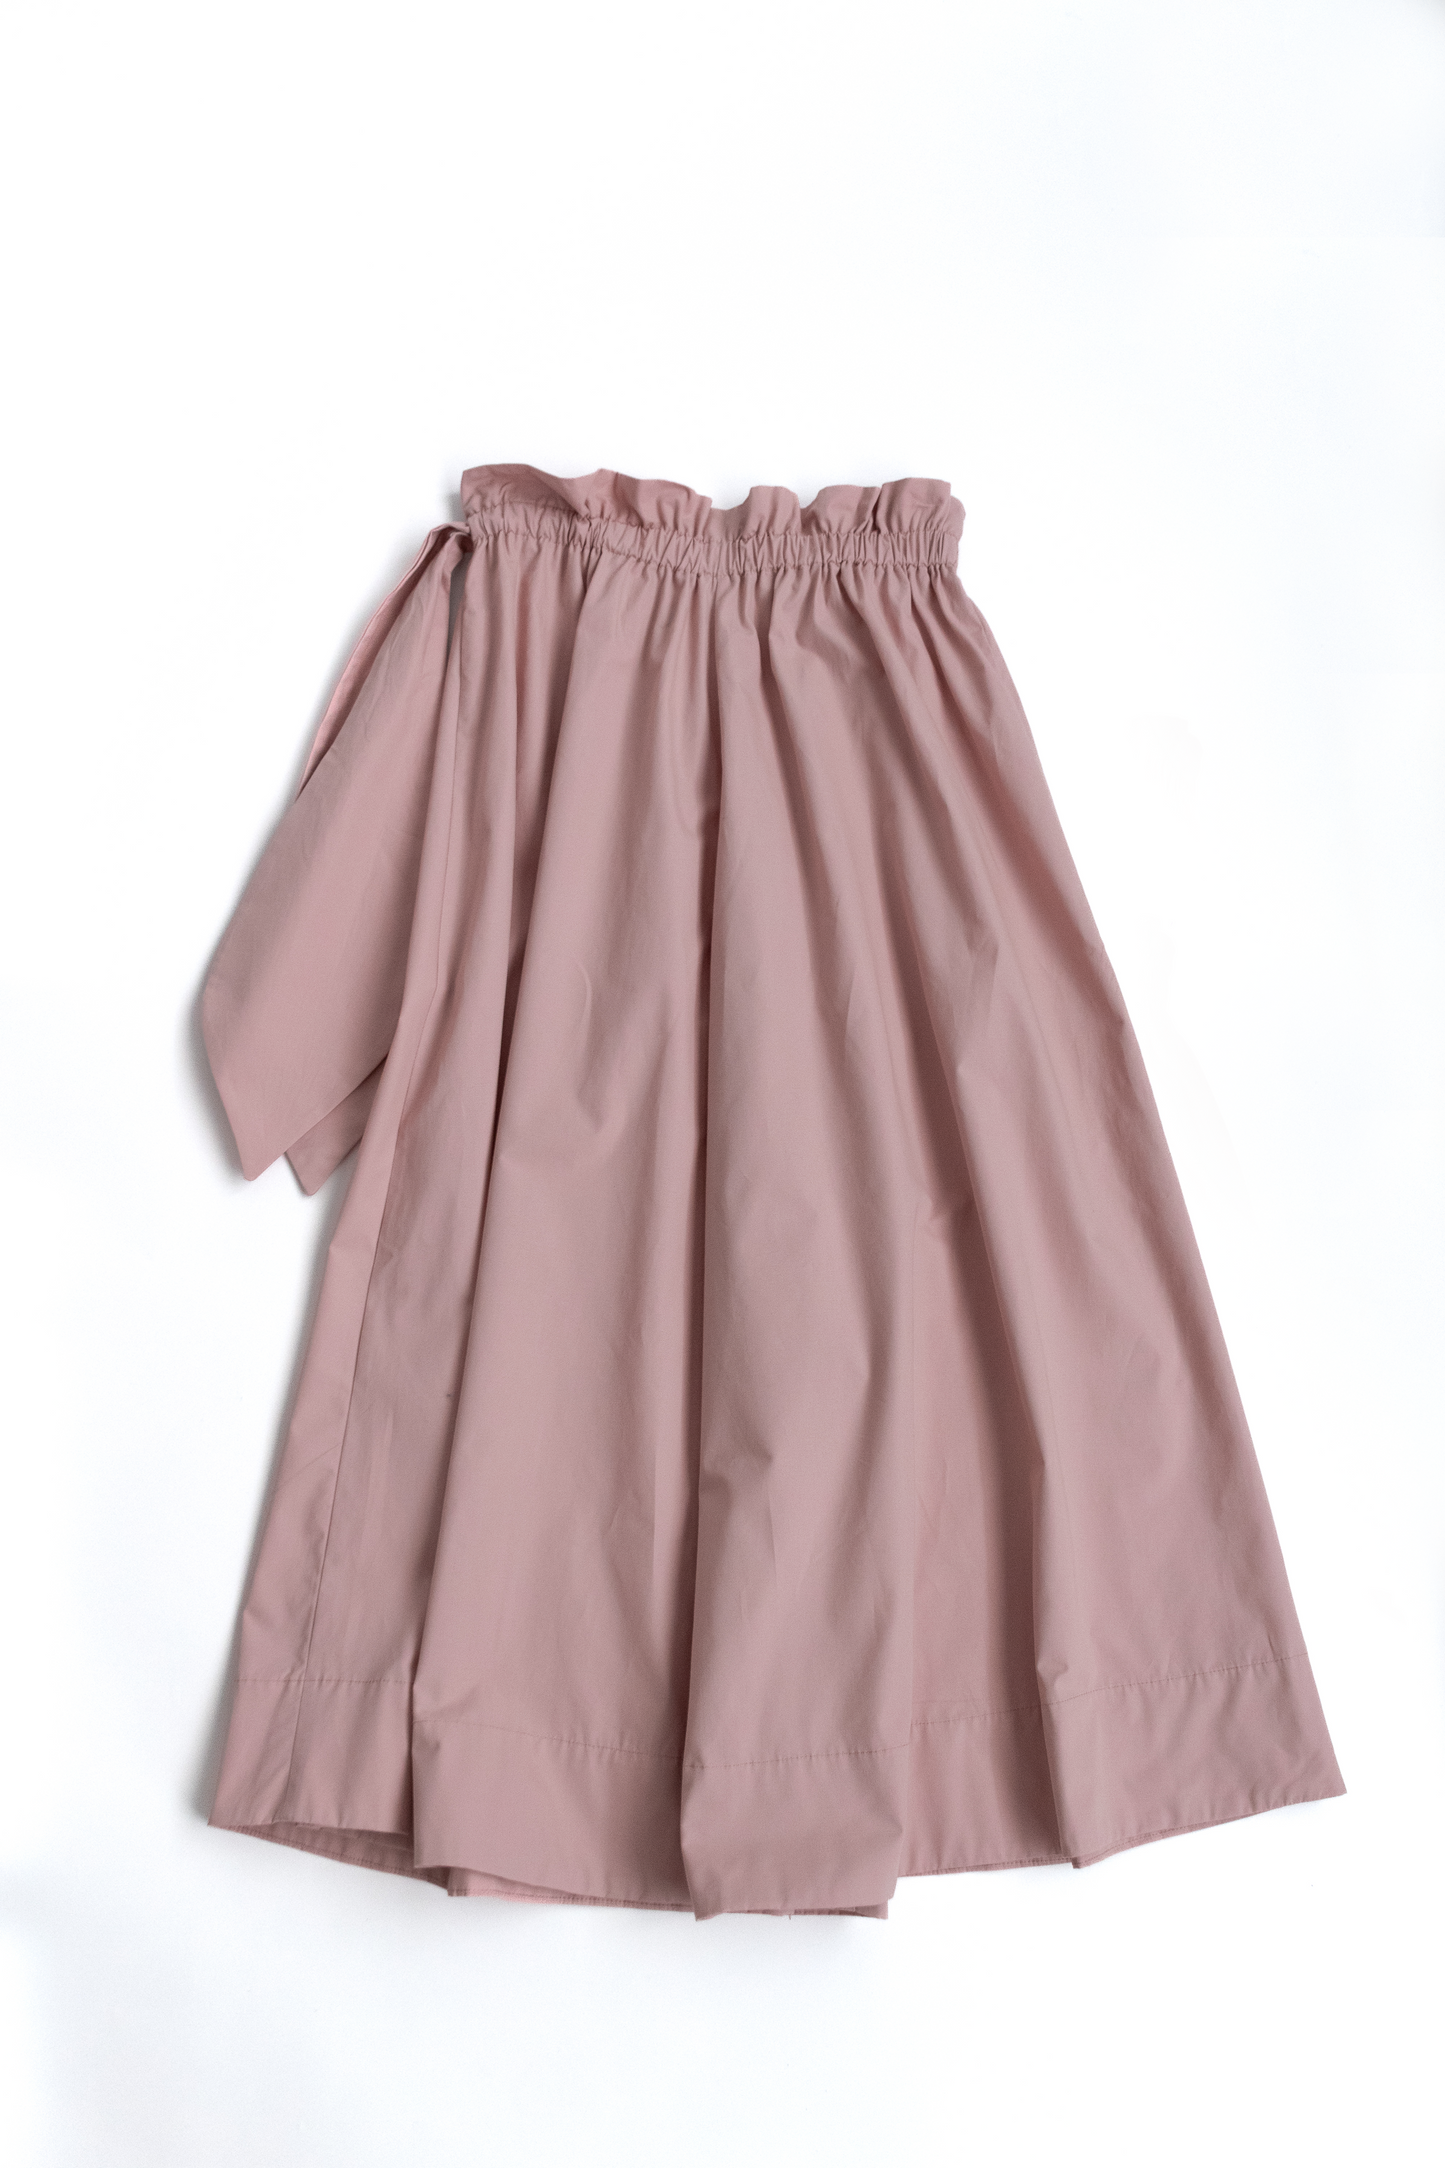 NUDE PINK SKIRT TROUSERS